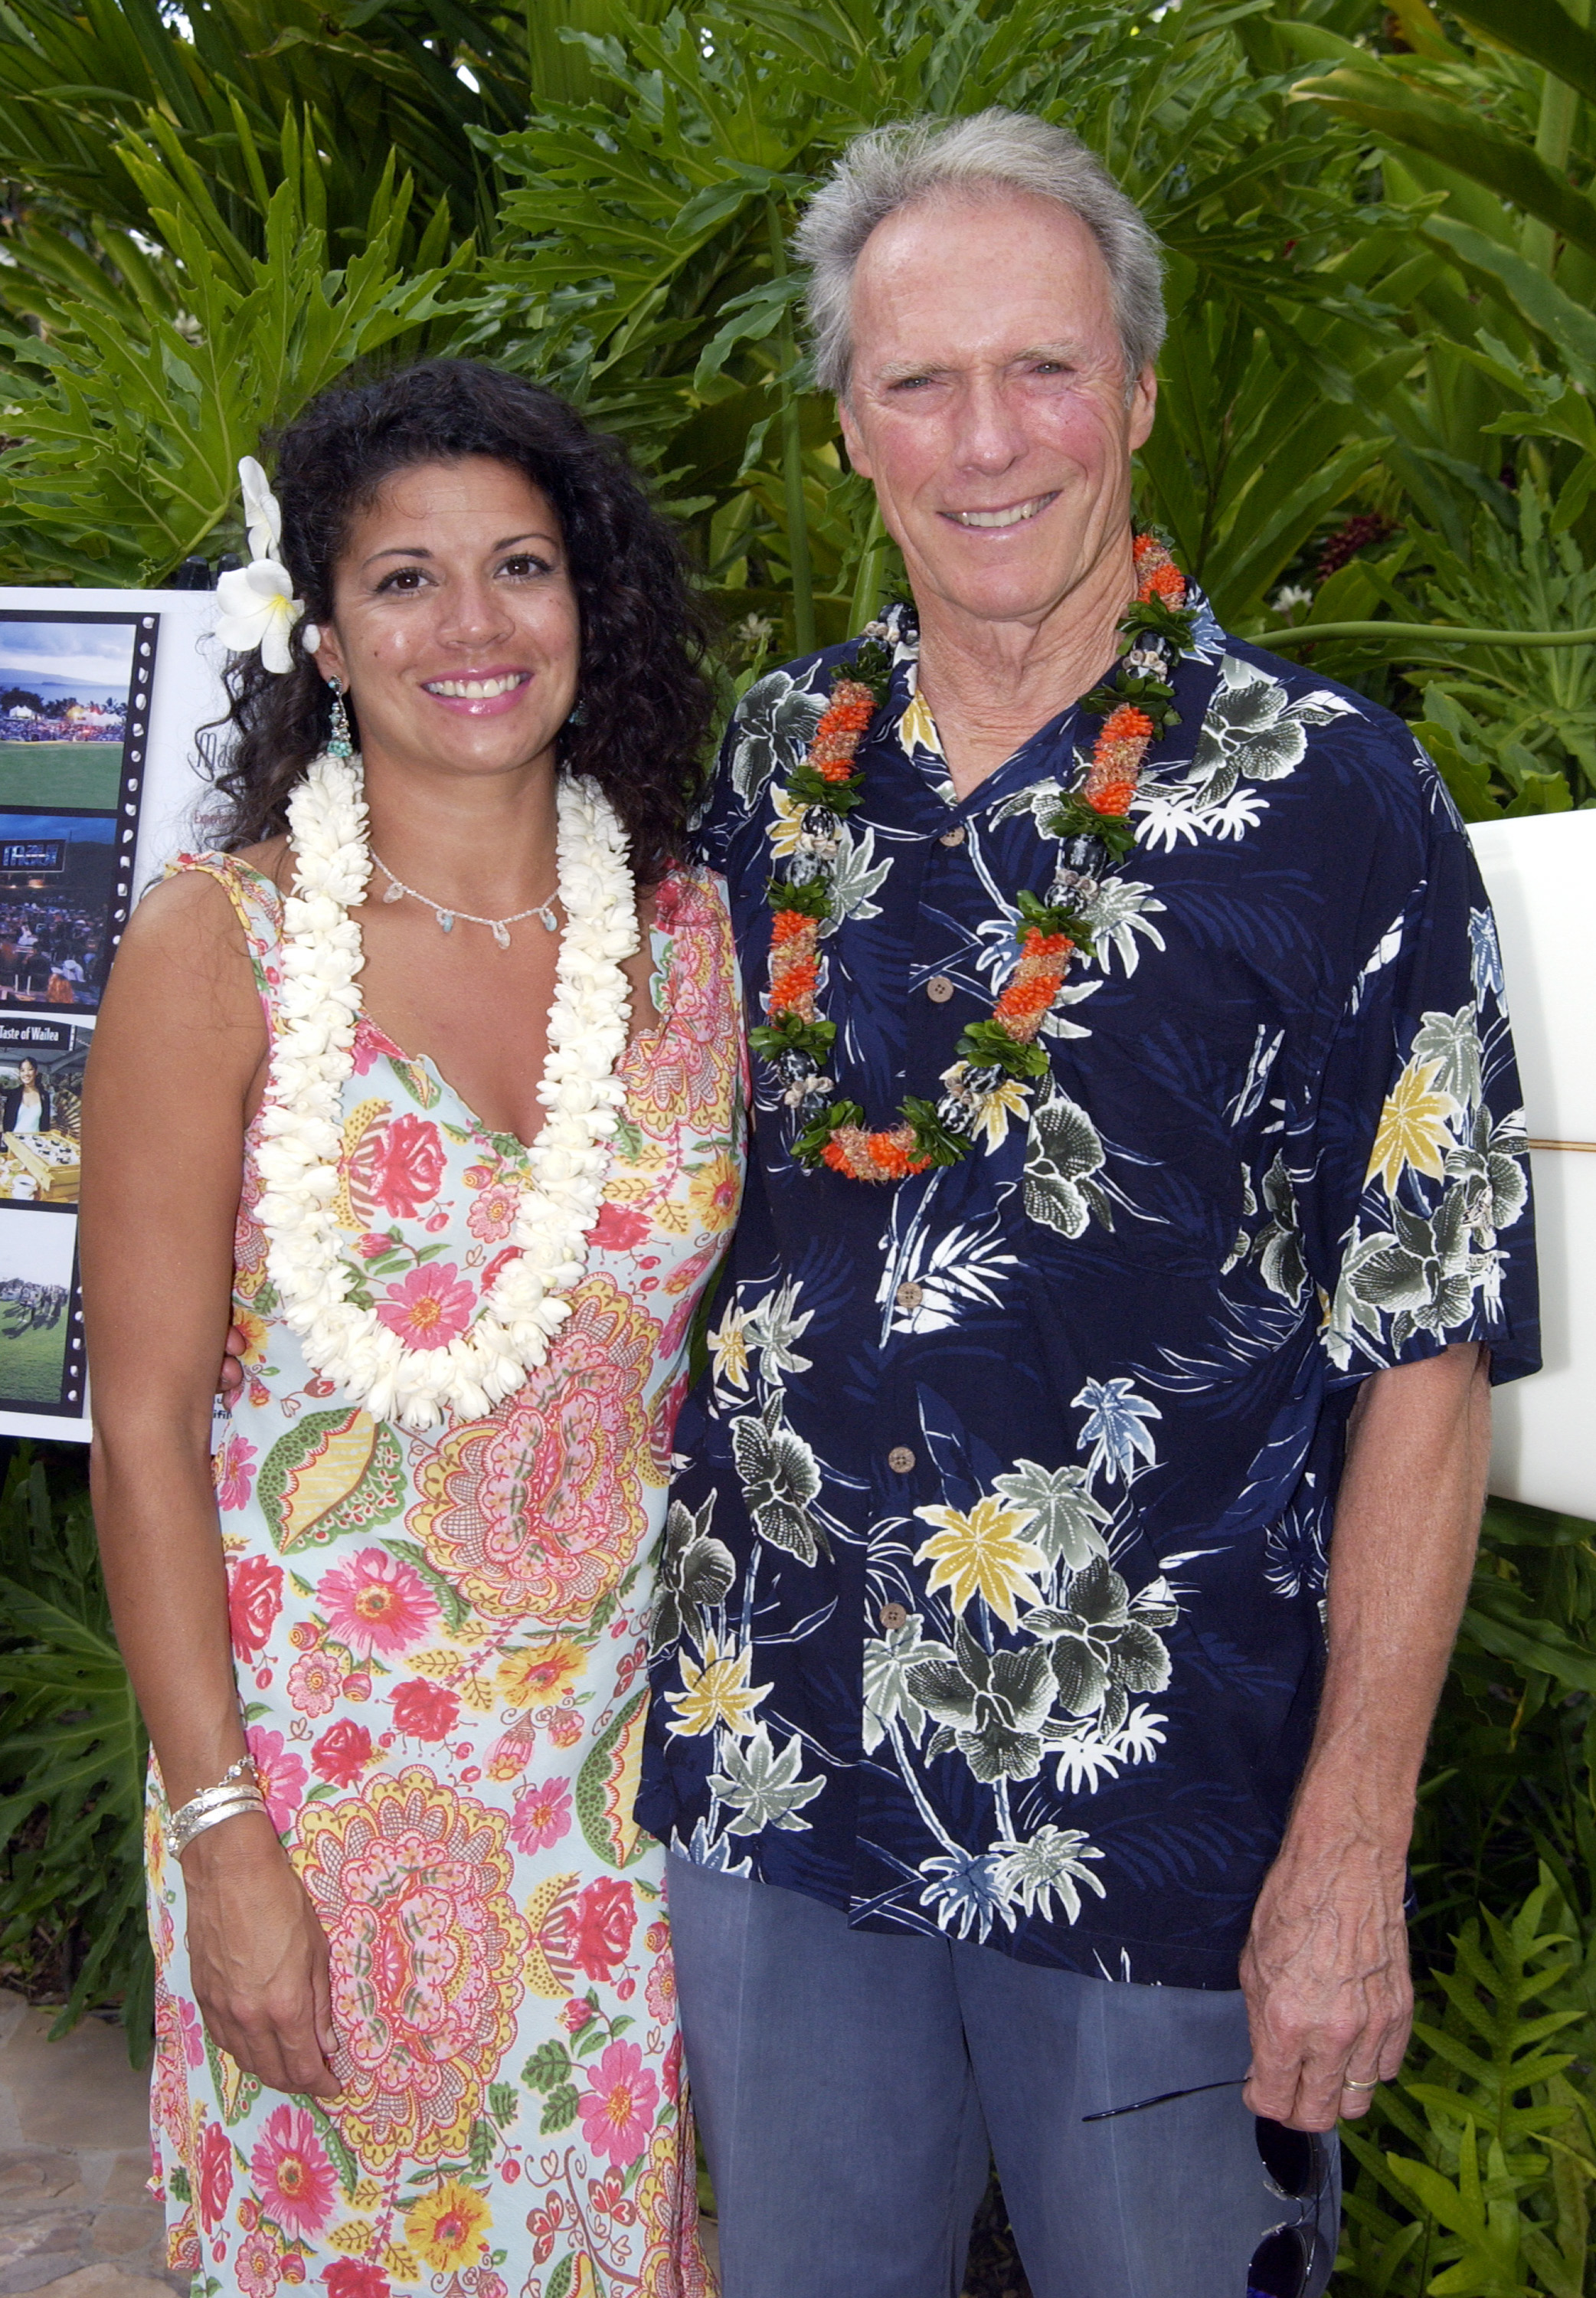 Clint Eastwood and Dina Eastwood during 2002 Maui Film Festival on June 14, 2002 in Maui, Hawaii. | Source: Getty Images